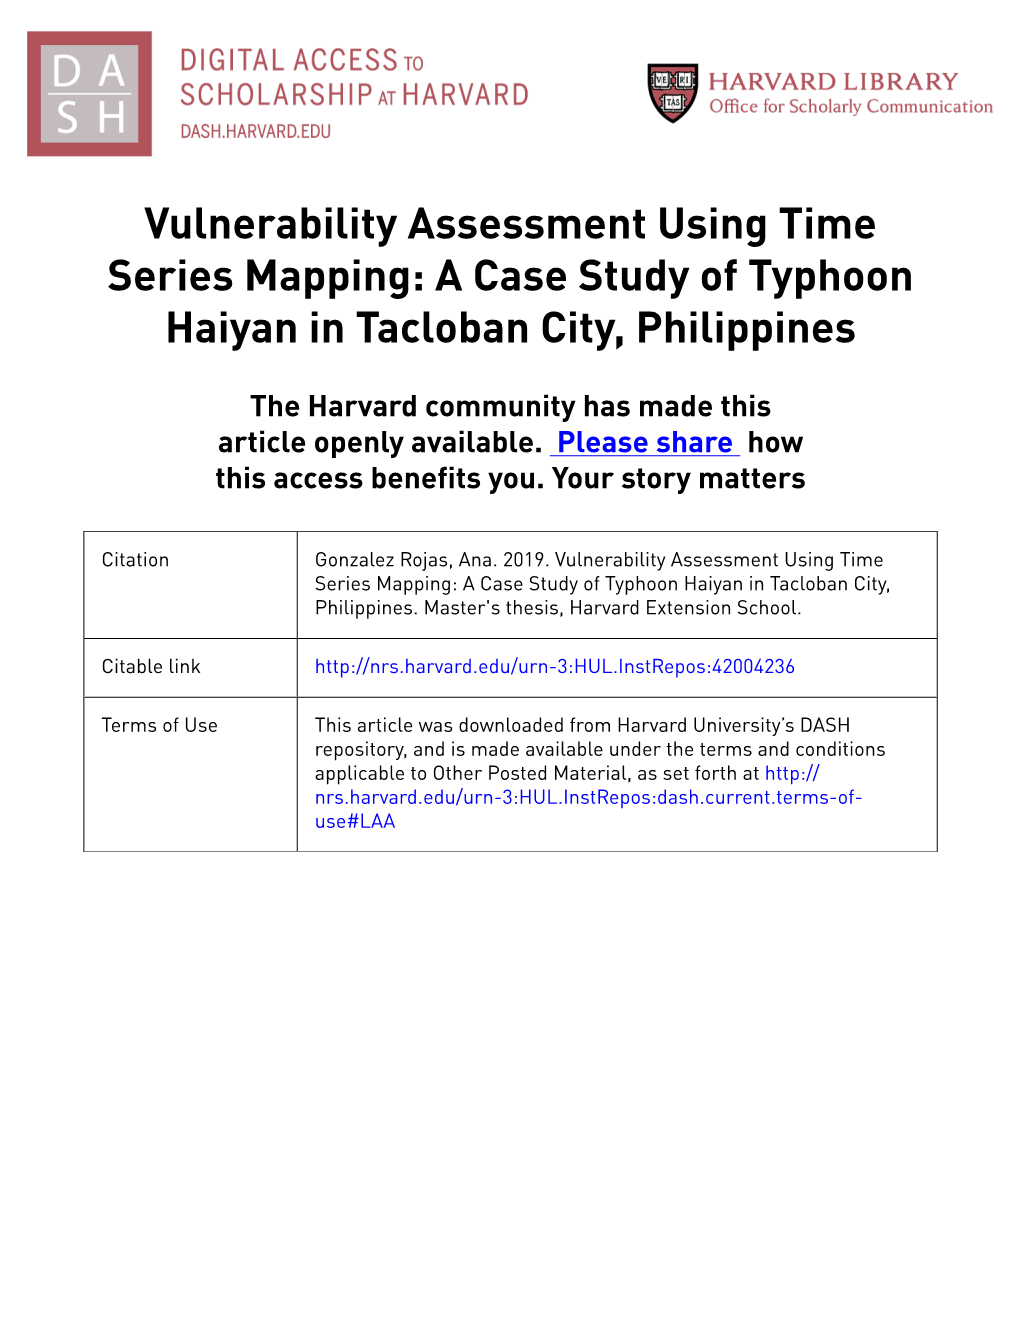 A Case Study of Typhoon Haiyan in Tacloban City, Philippines